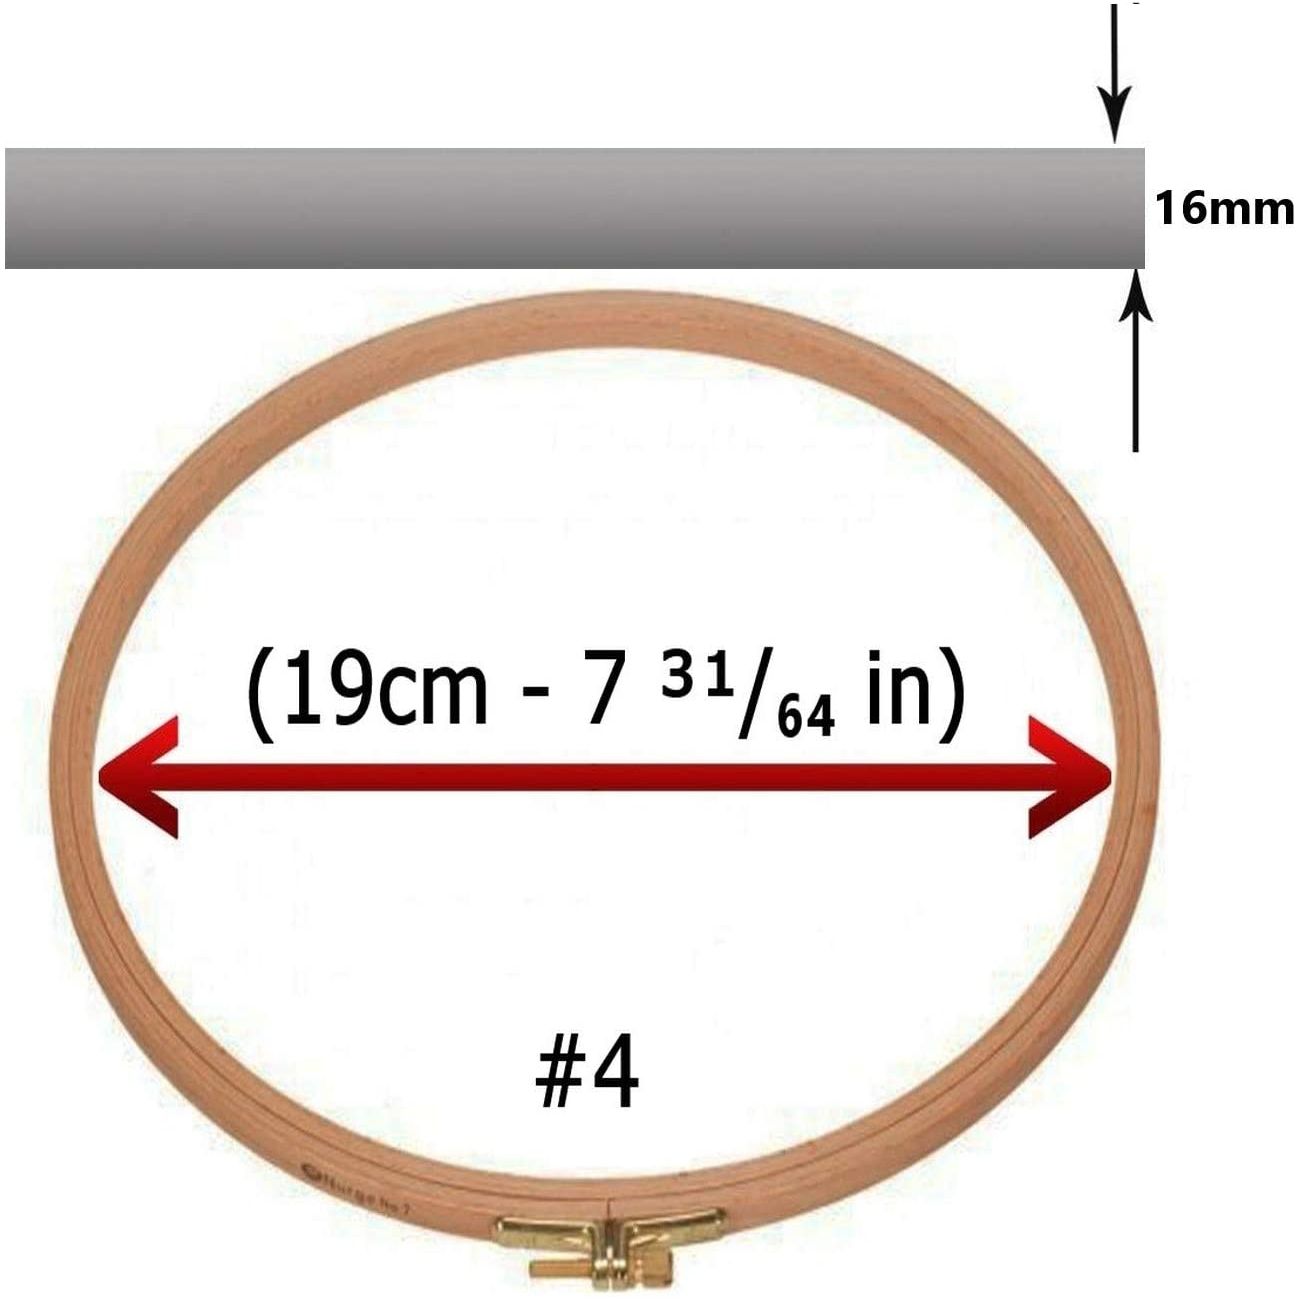 natural beech wood round quilt 16mm embroidery hoop 19cm - 7 ³¹/₆₄ in